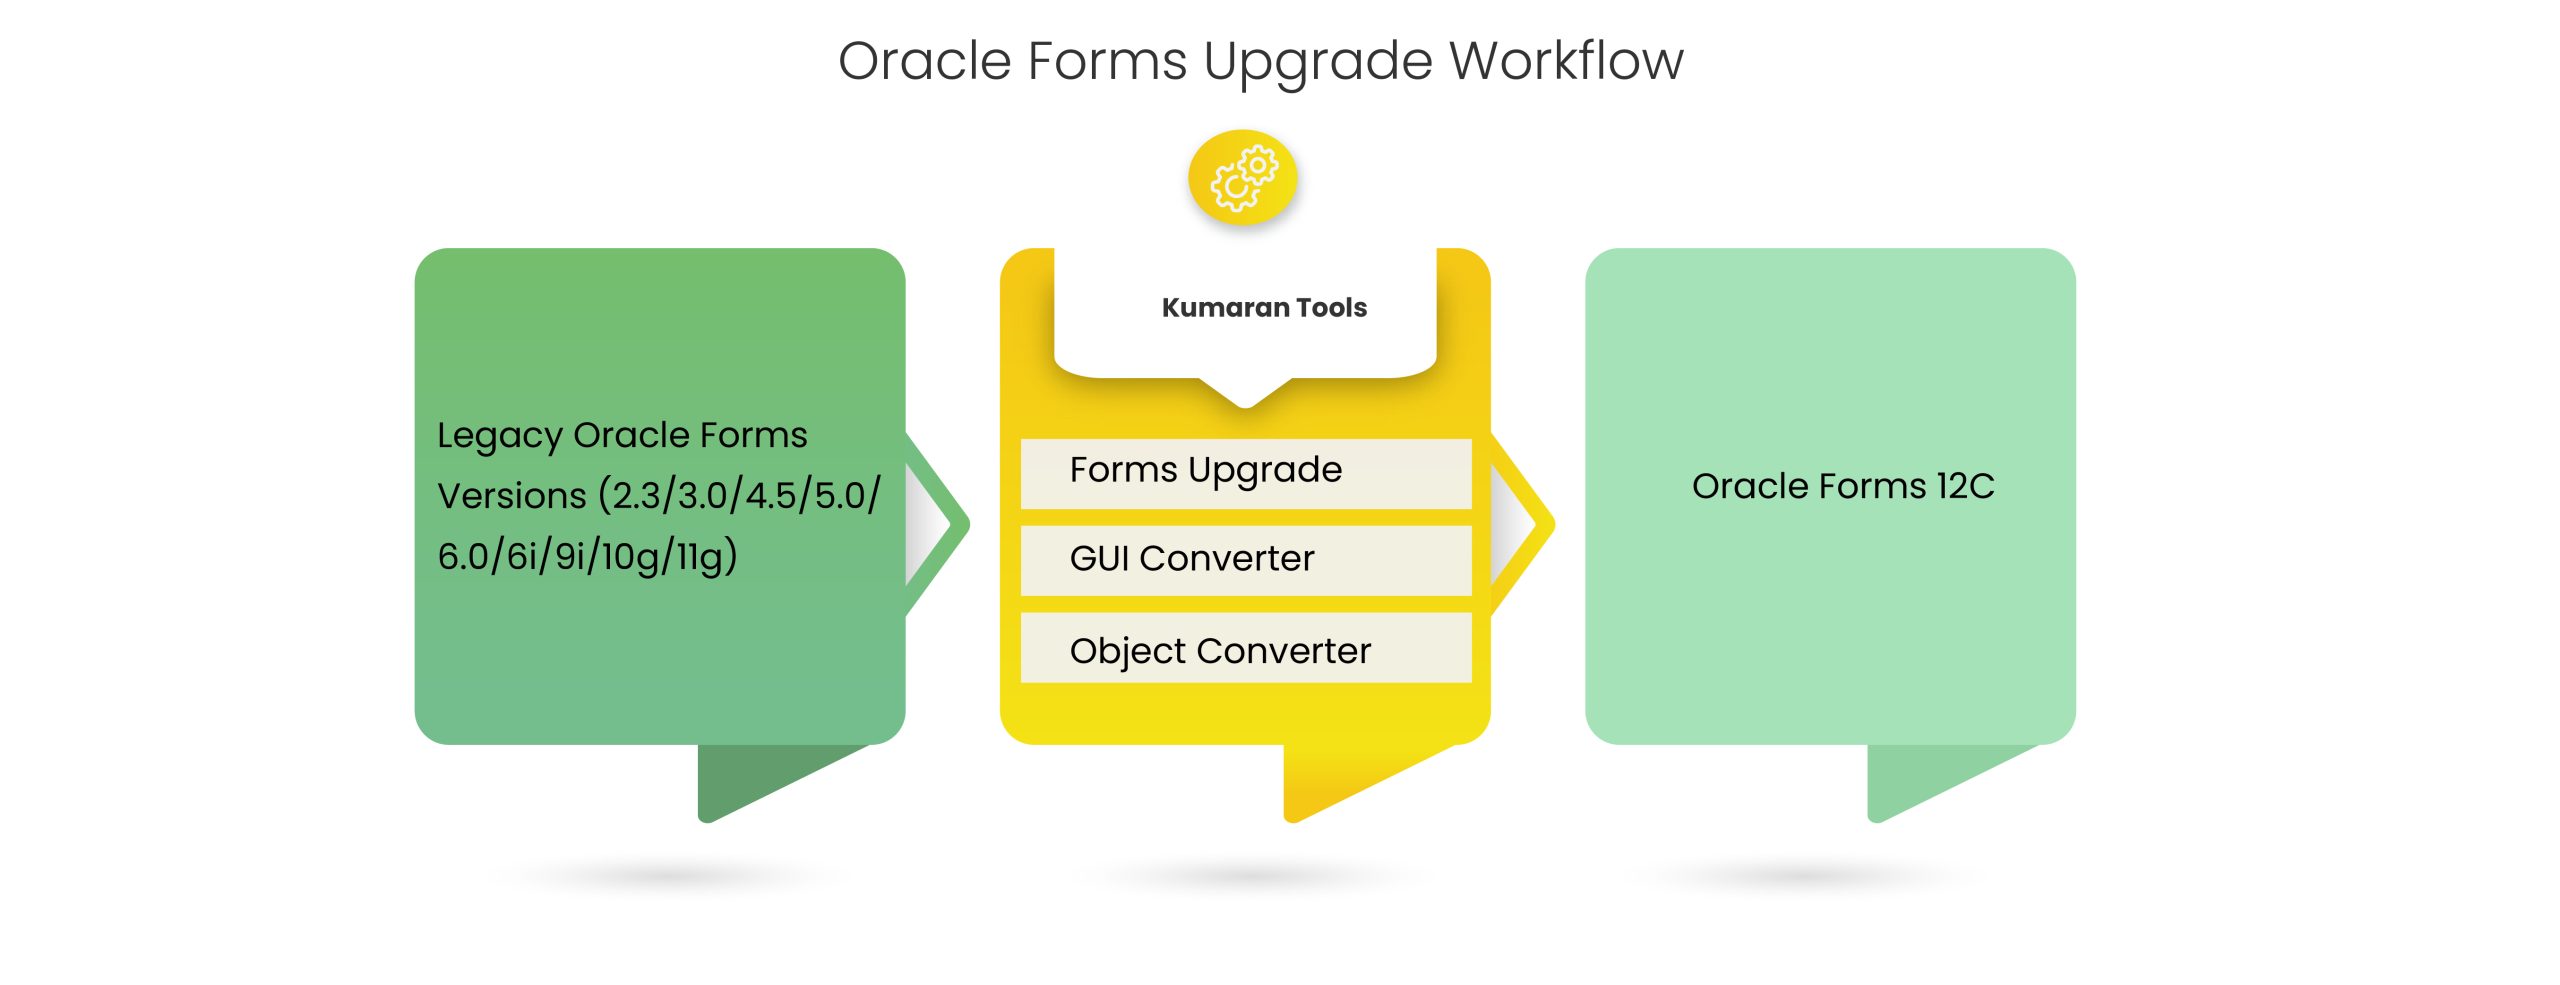 oracle forms upgrade workflow